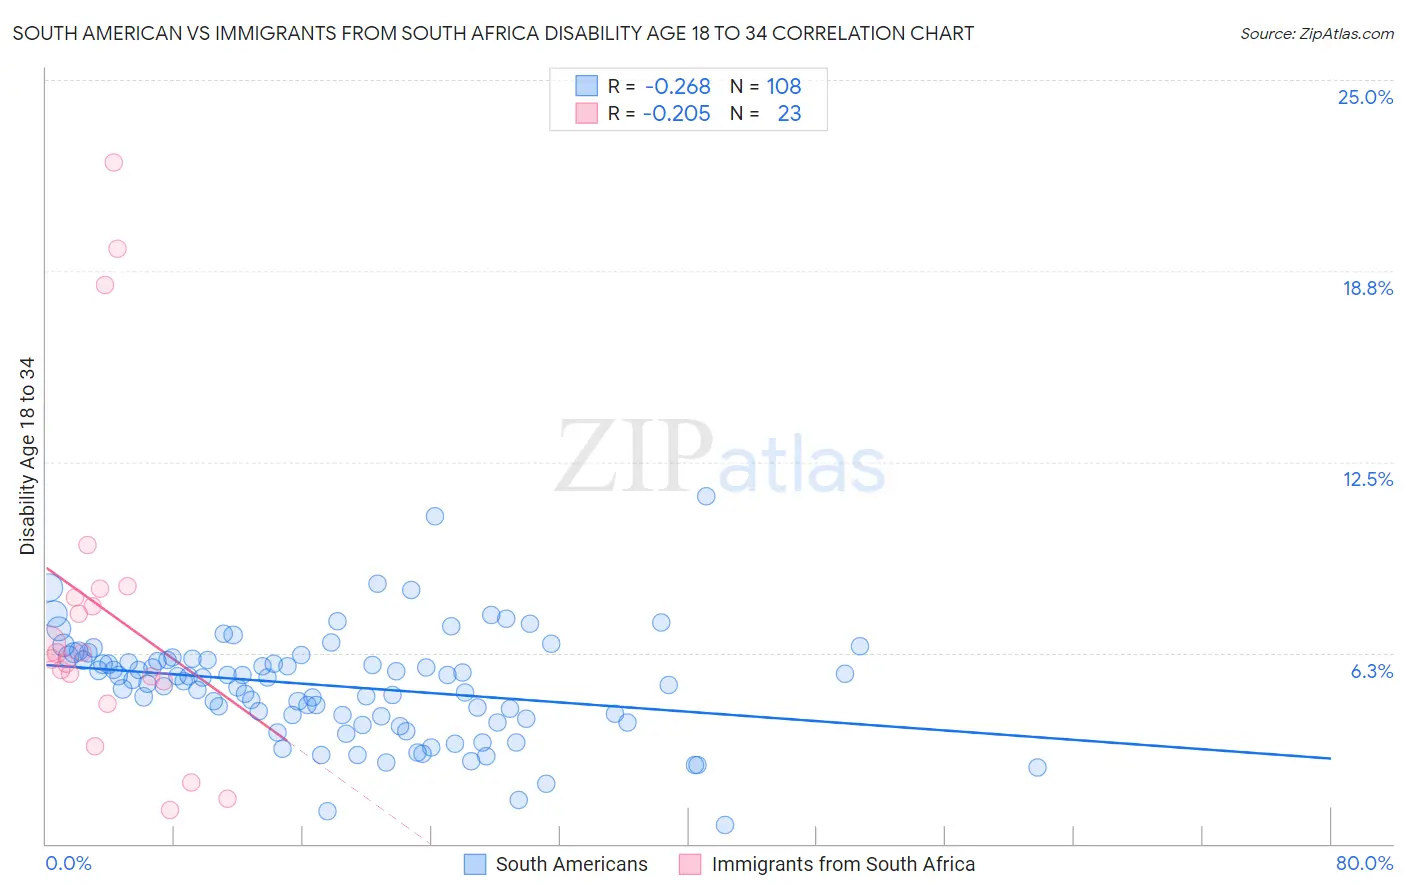 South American vs Immigrants from South Africa Disability Age 18 to 34